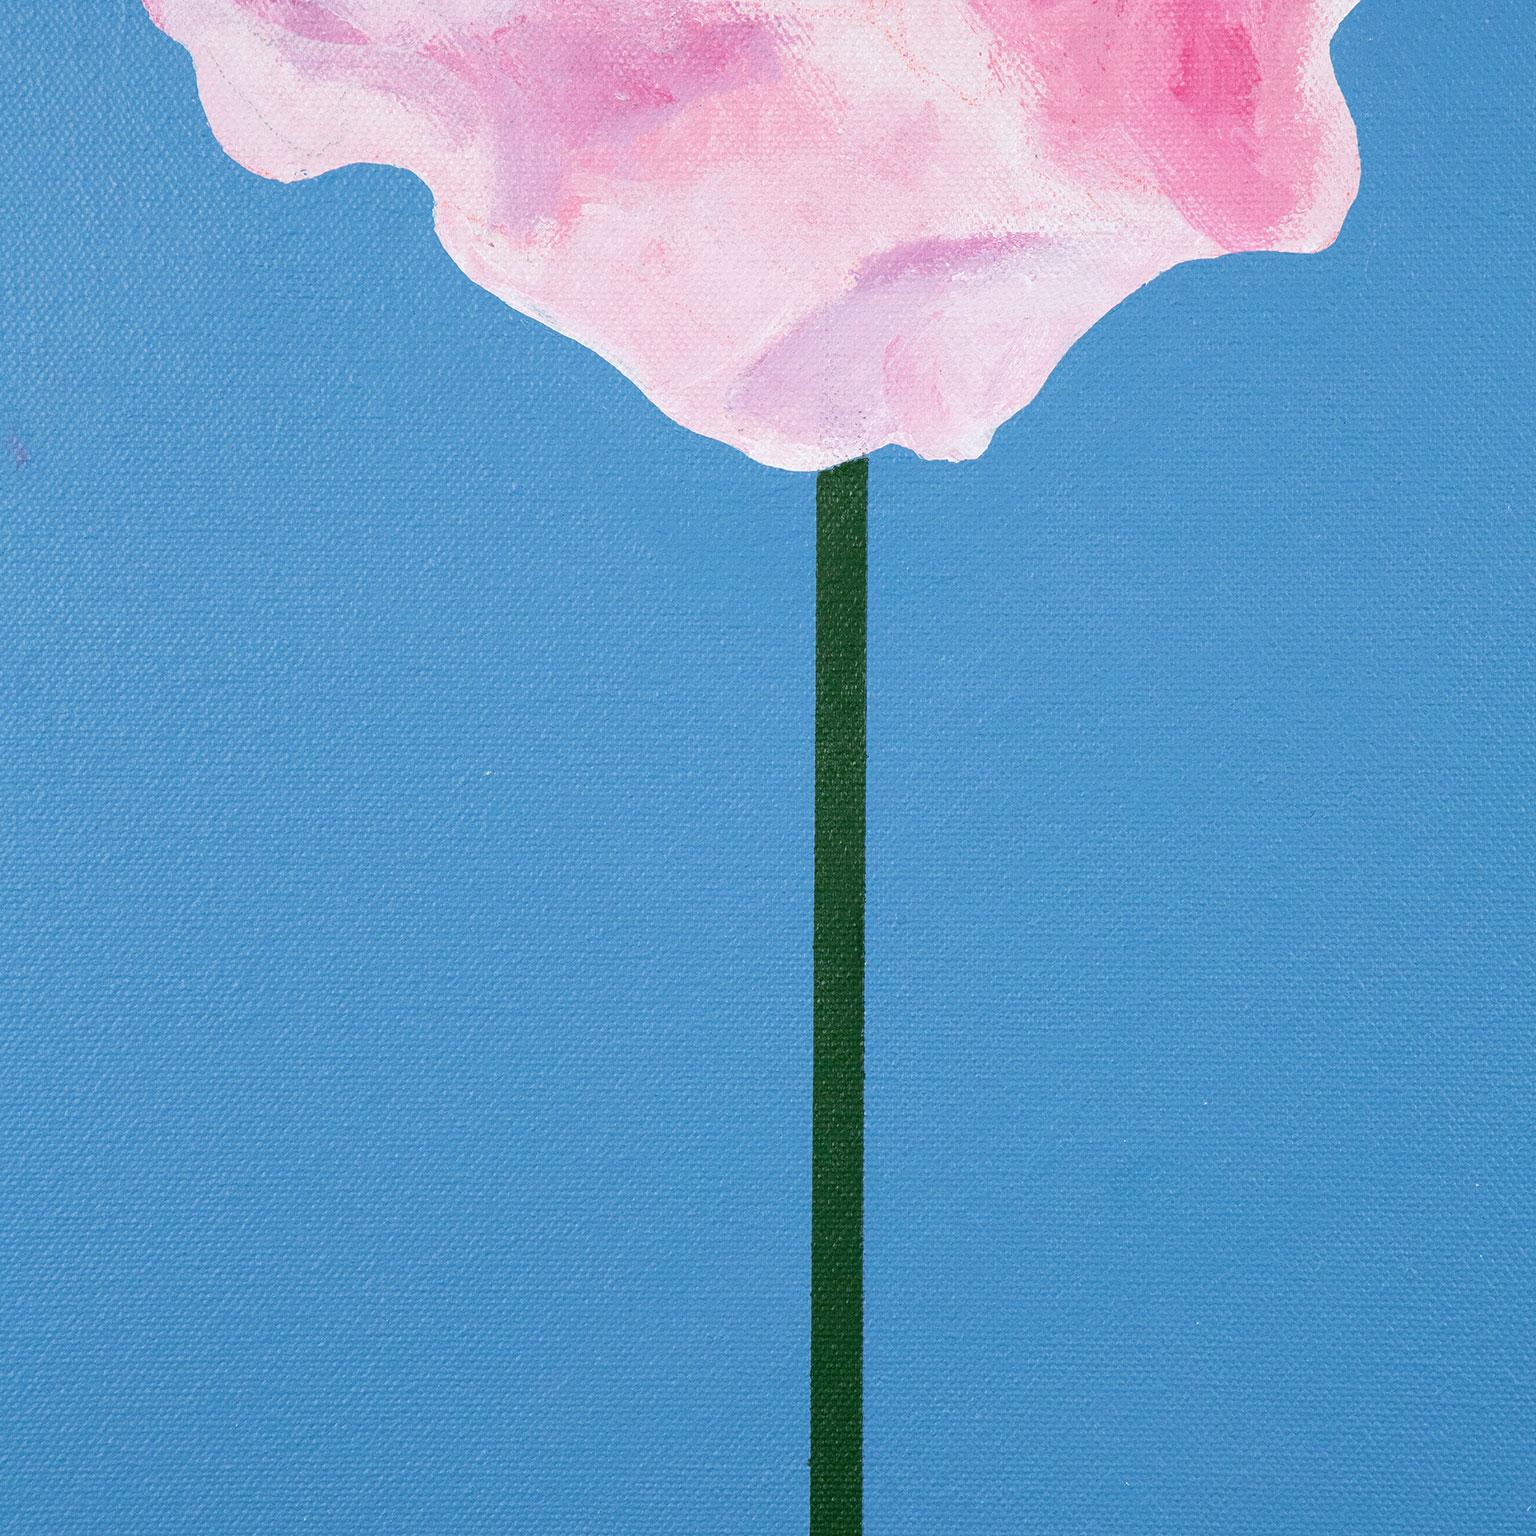 Poppy - Contemporary Painting by Charles Pachter